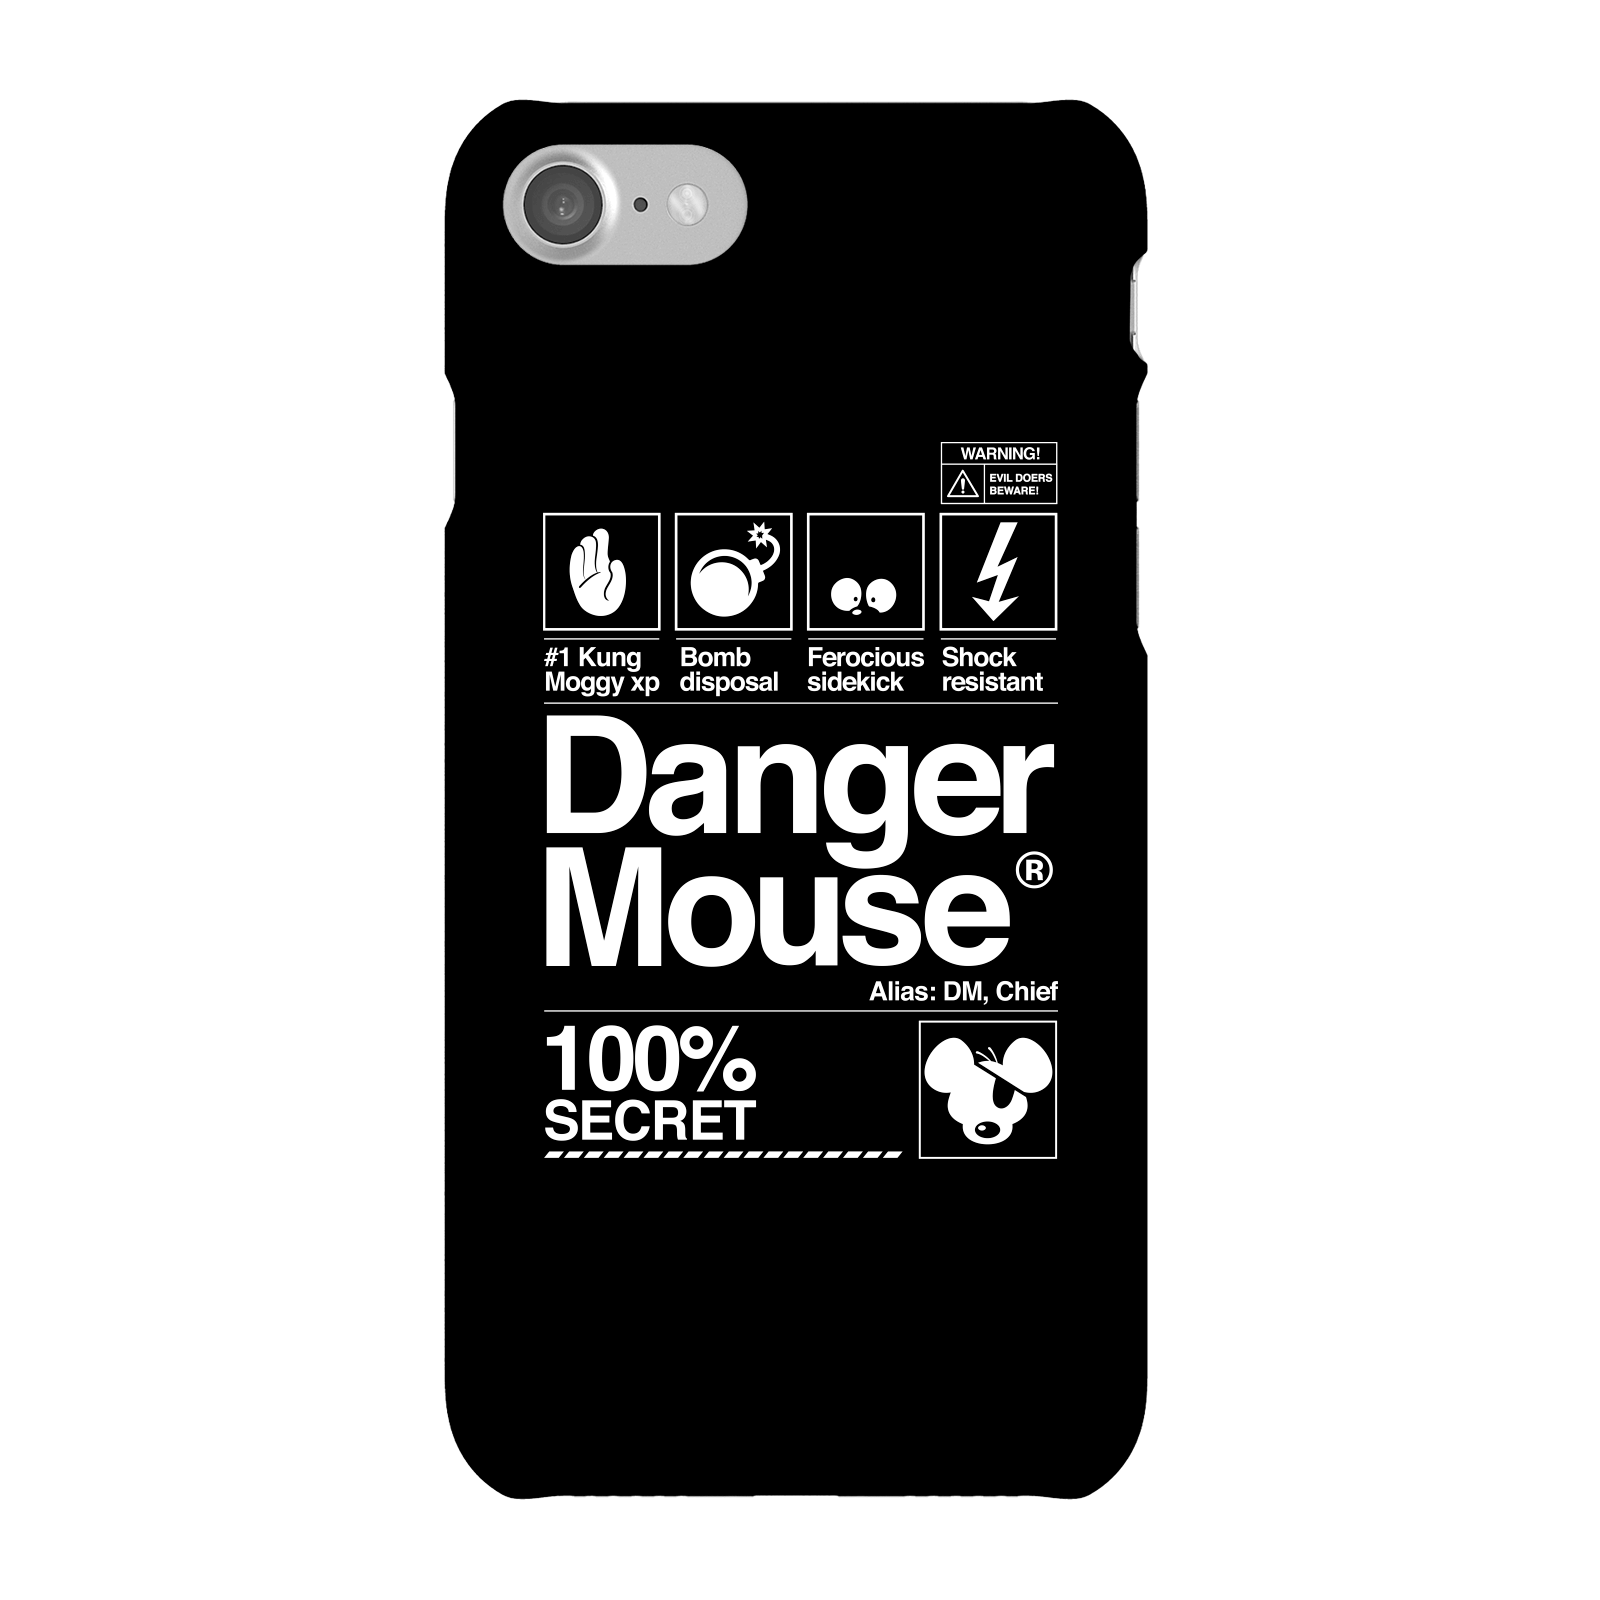 Danger Mouse 100% Secret Phone Case for iPhone and Android - iPhone 7 - Snap Case - Matte